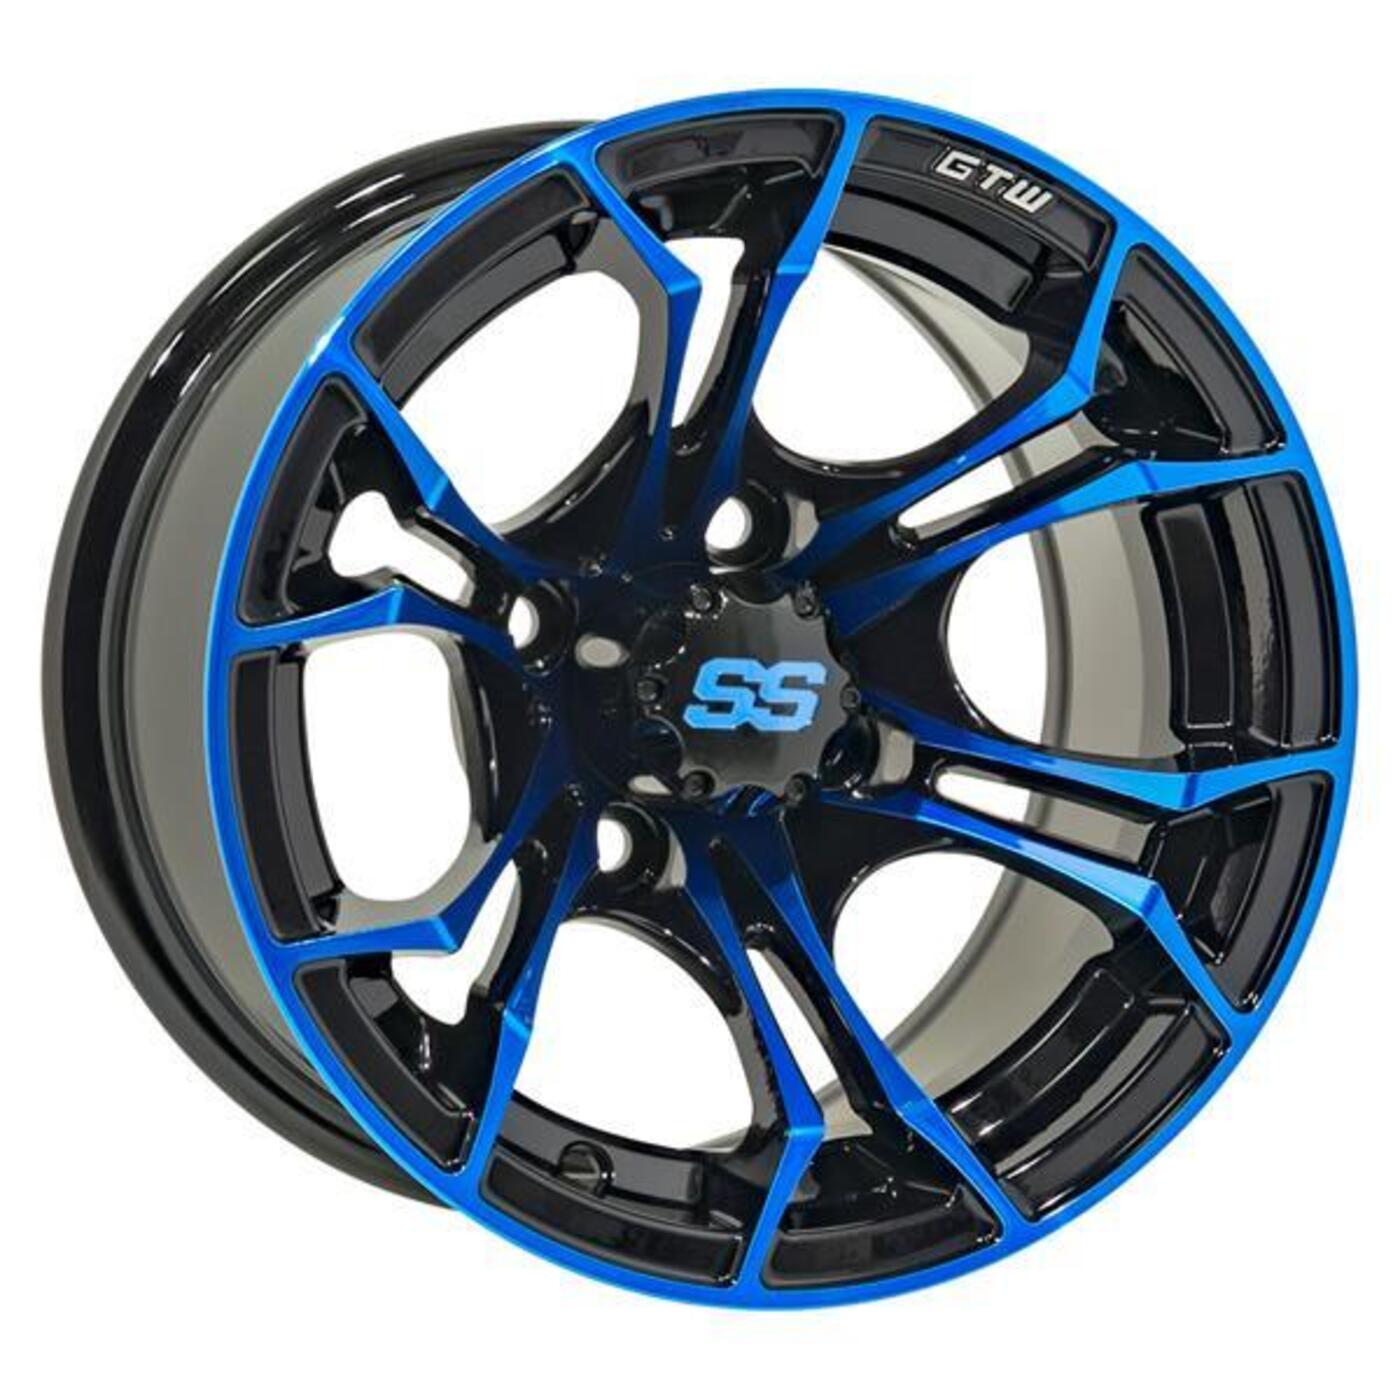 12" GTW Spyder Wheel - Black with Blue Accents 19-220